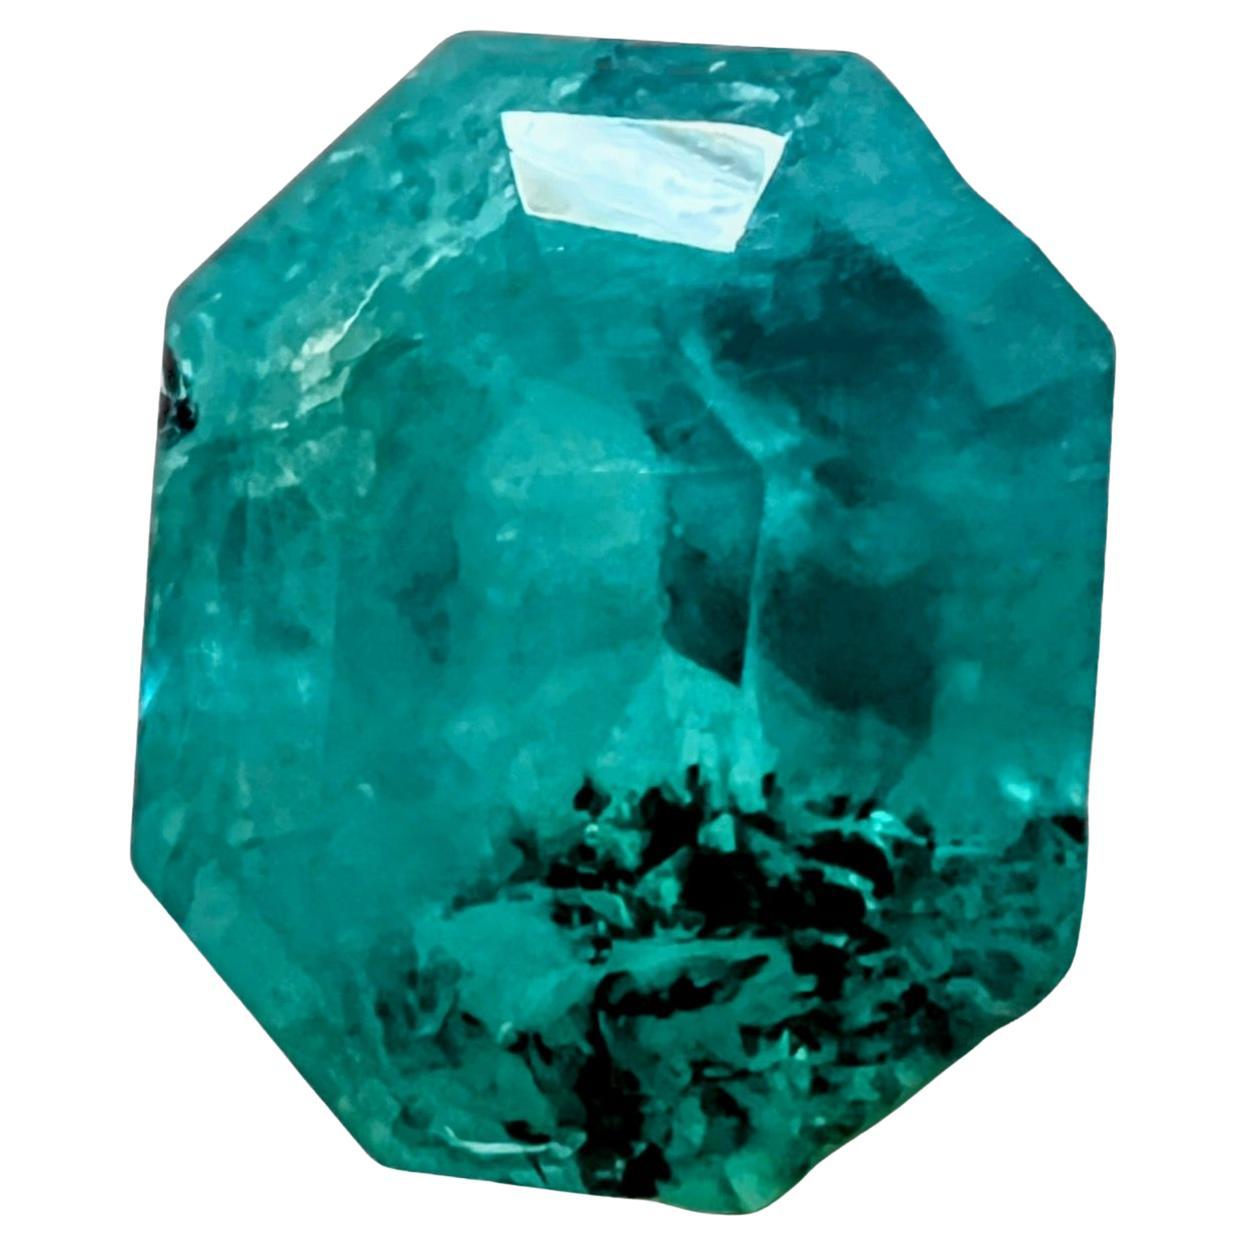 Elegance meets nature's perfection with our 3.28ct Radiant Cut No-Oil Natural 100% Untreated Emerald Loose Gemstone. This exquisite gem captures the essence of authenticity, showcasing a captivating color, clarity, and size that is destined to adorn